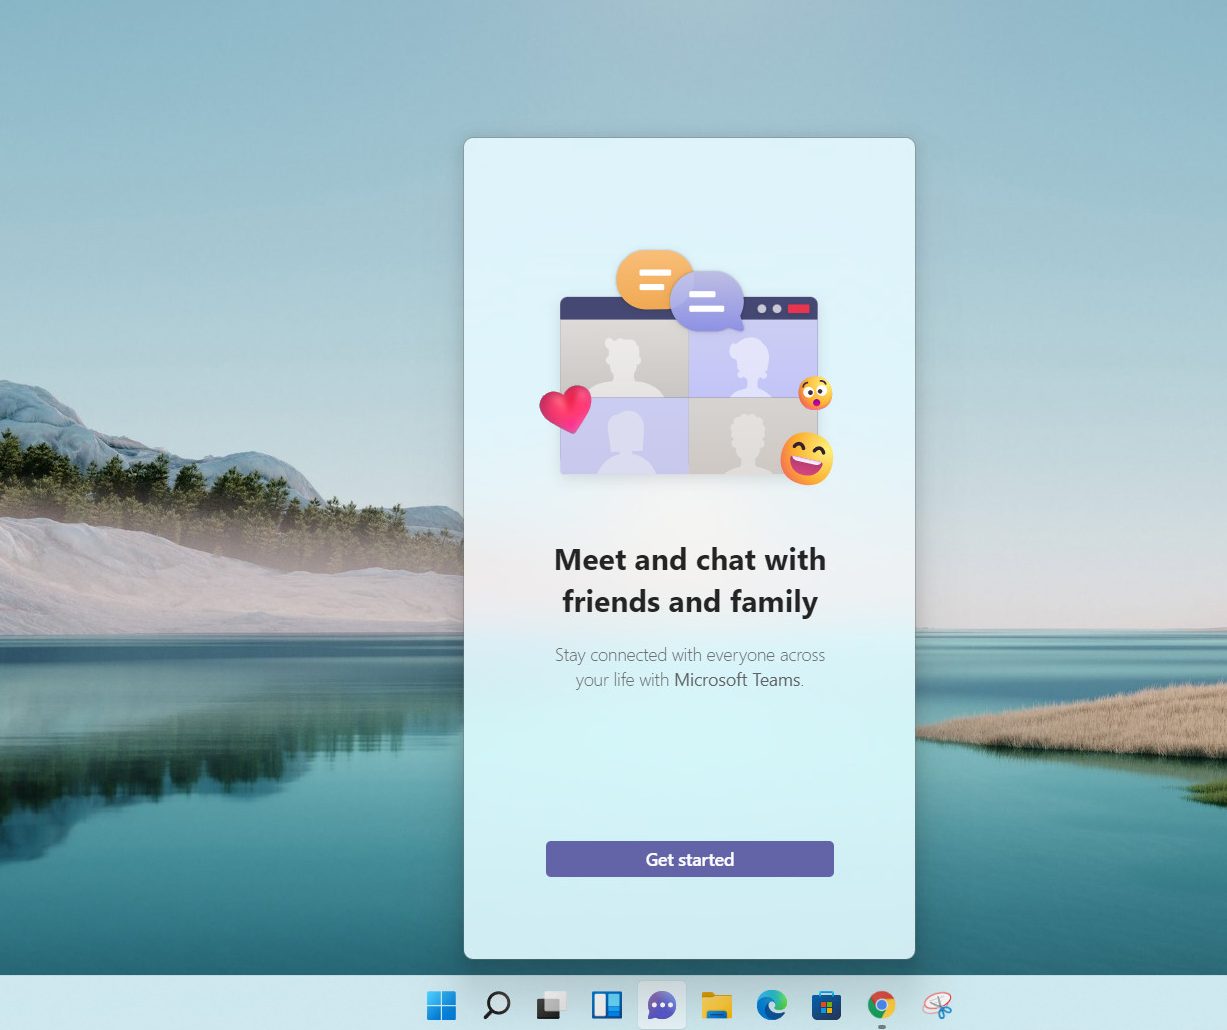 Microsoft Teams for Windows 11 is now considerably faster